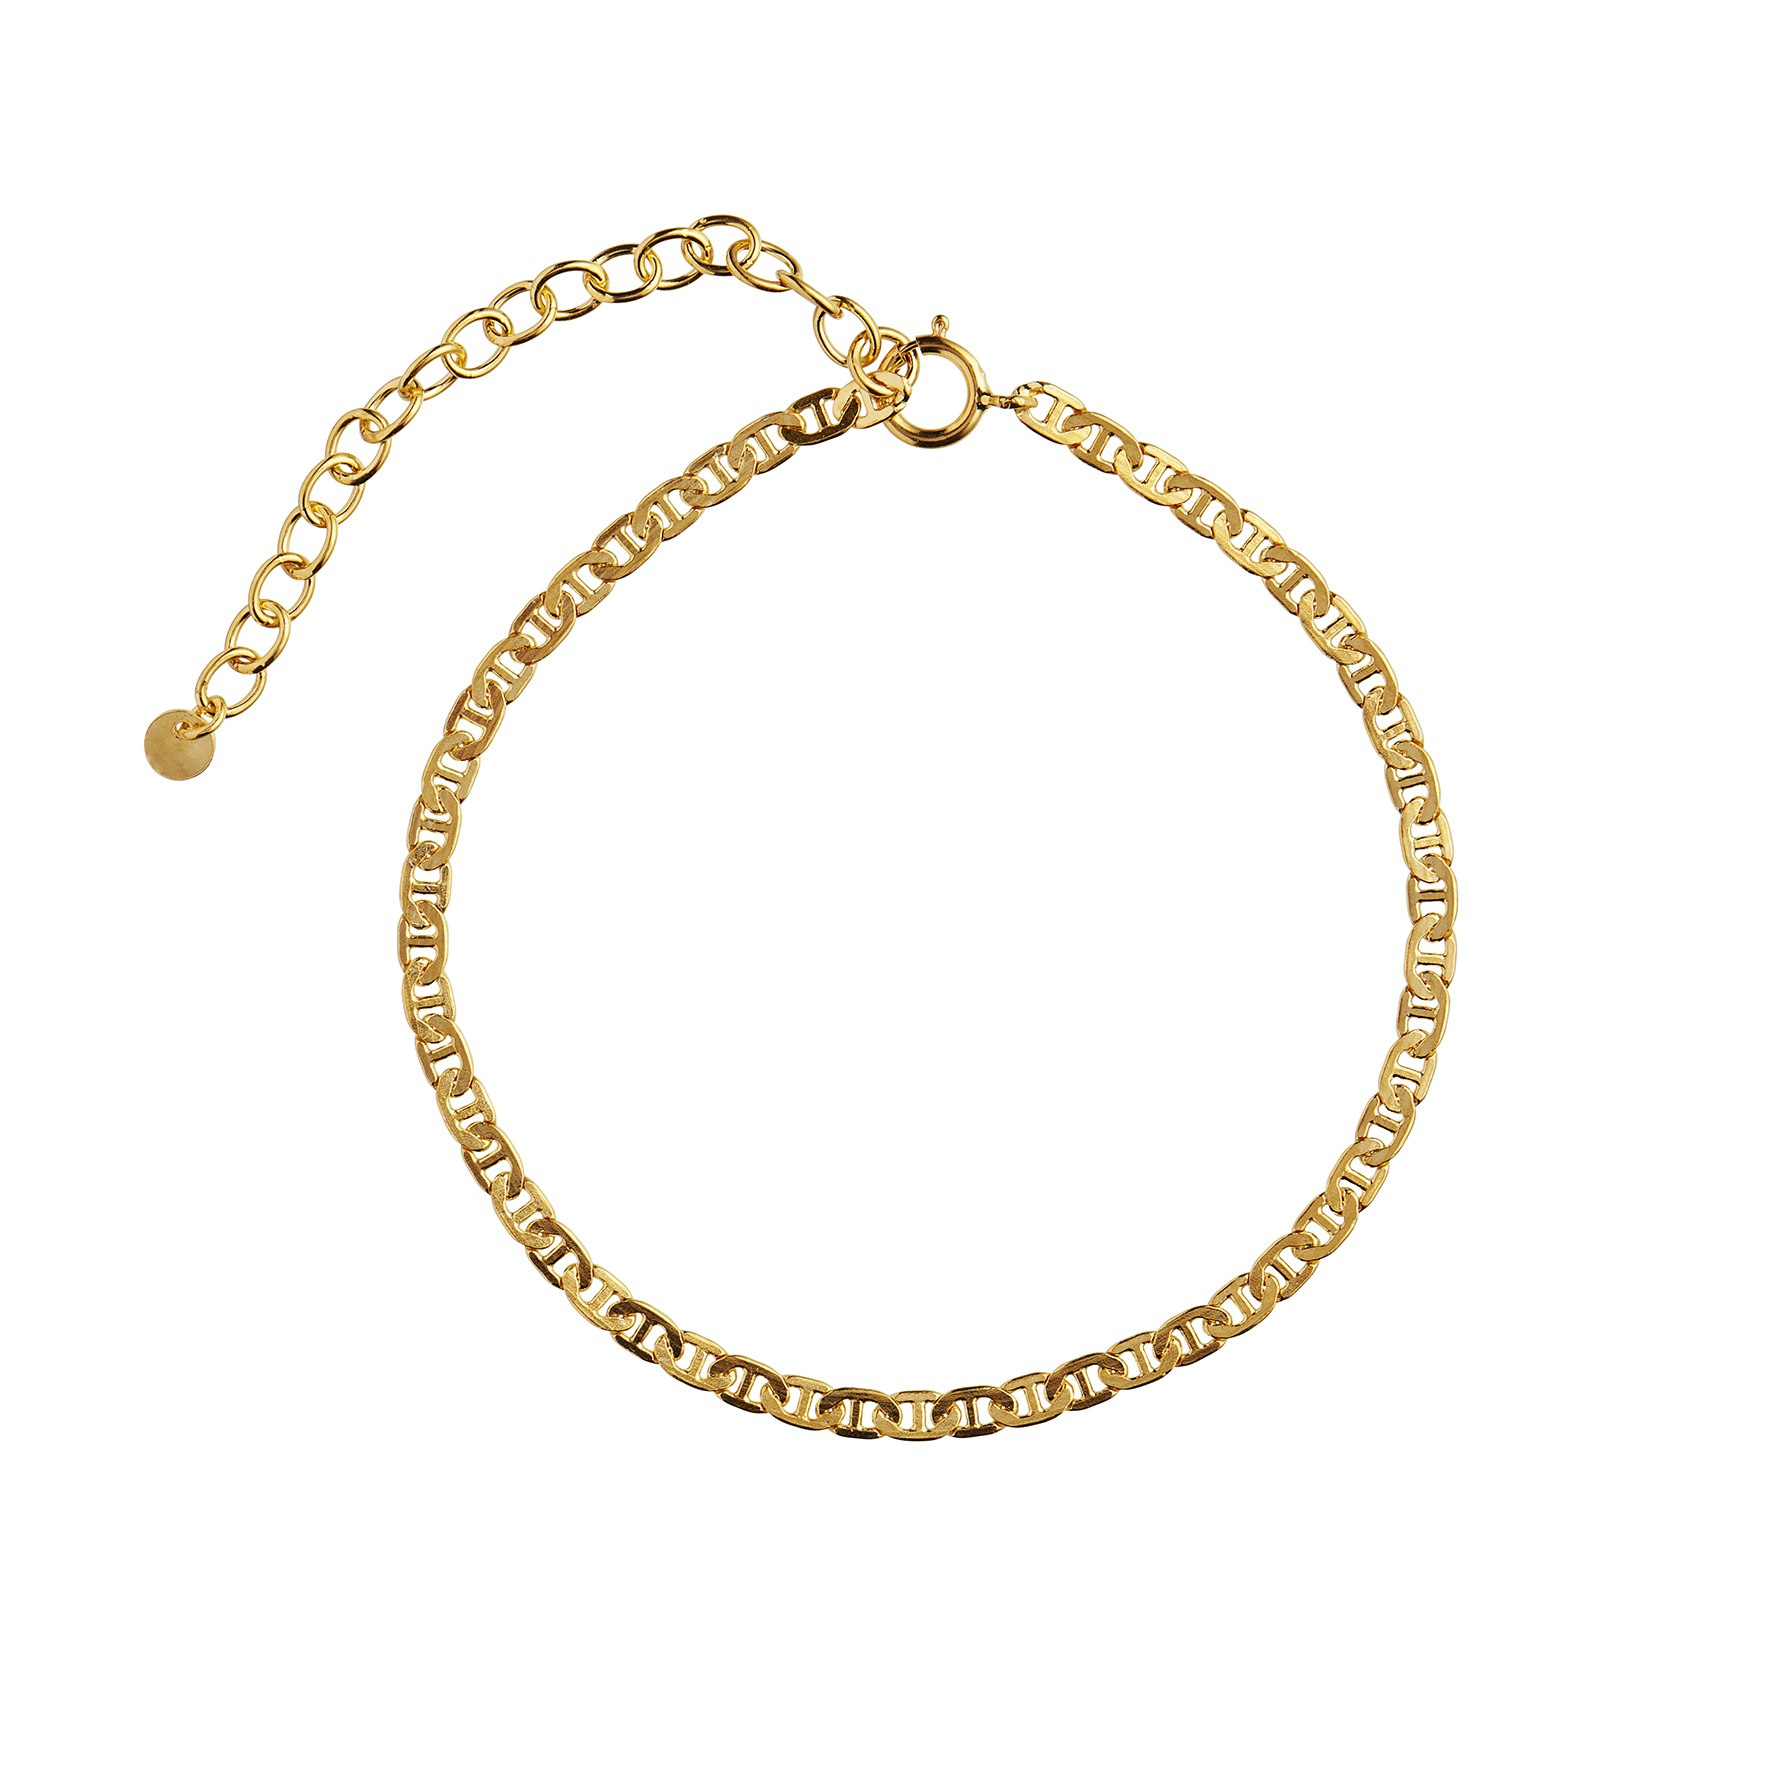 Petit Link Bracelet from STINE A Jewelry in Goldplated Silver Sterling 925